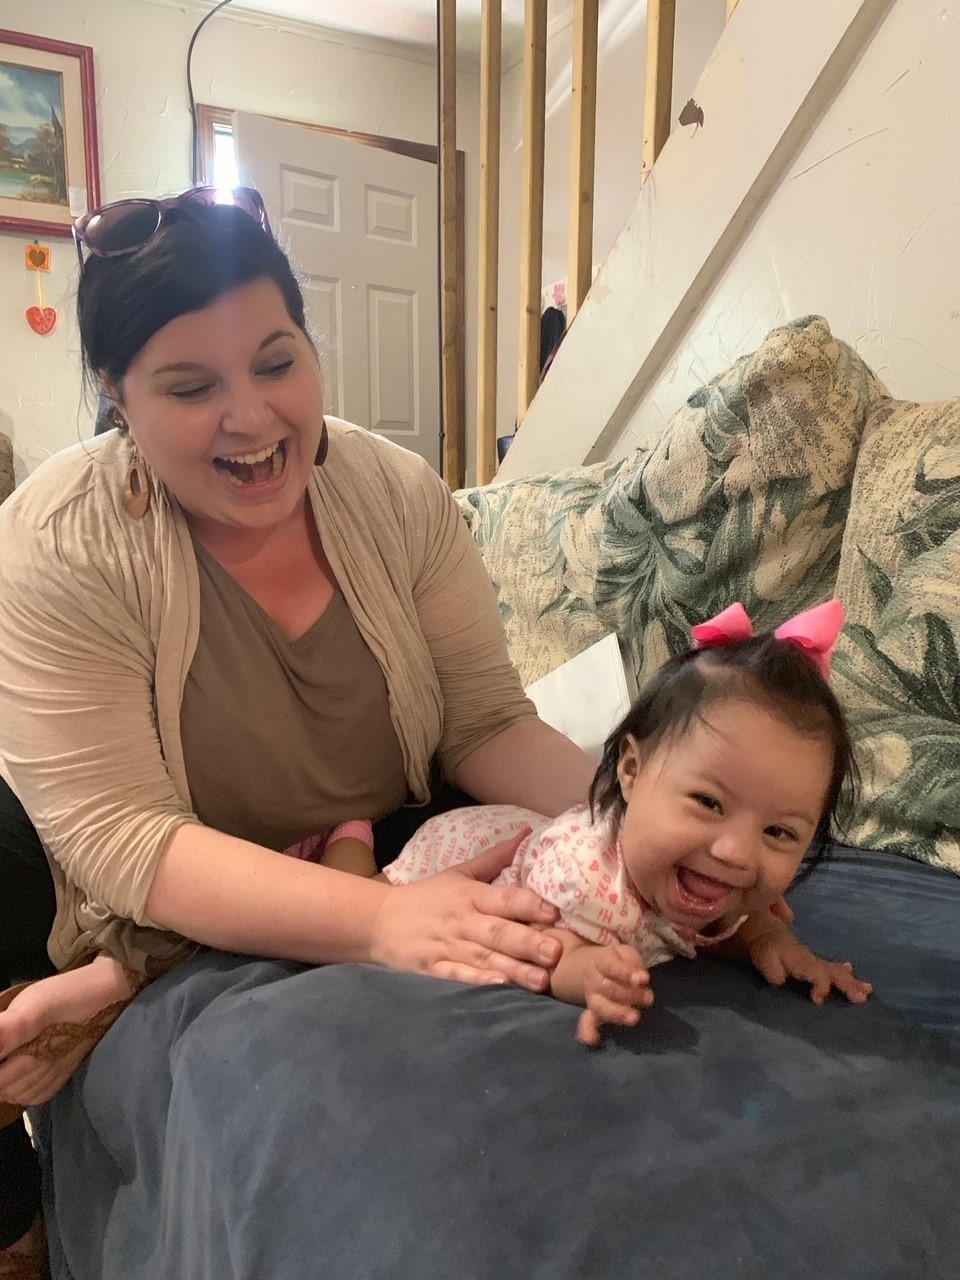 The picture shows a happy Latino infant girl laying on her belly on a couch, being held by her happy and smiling mom, as Sofia wiggles her arms and legs.